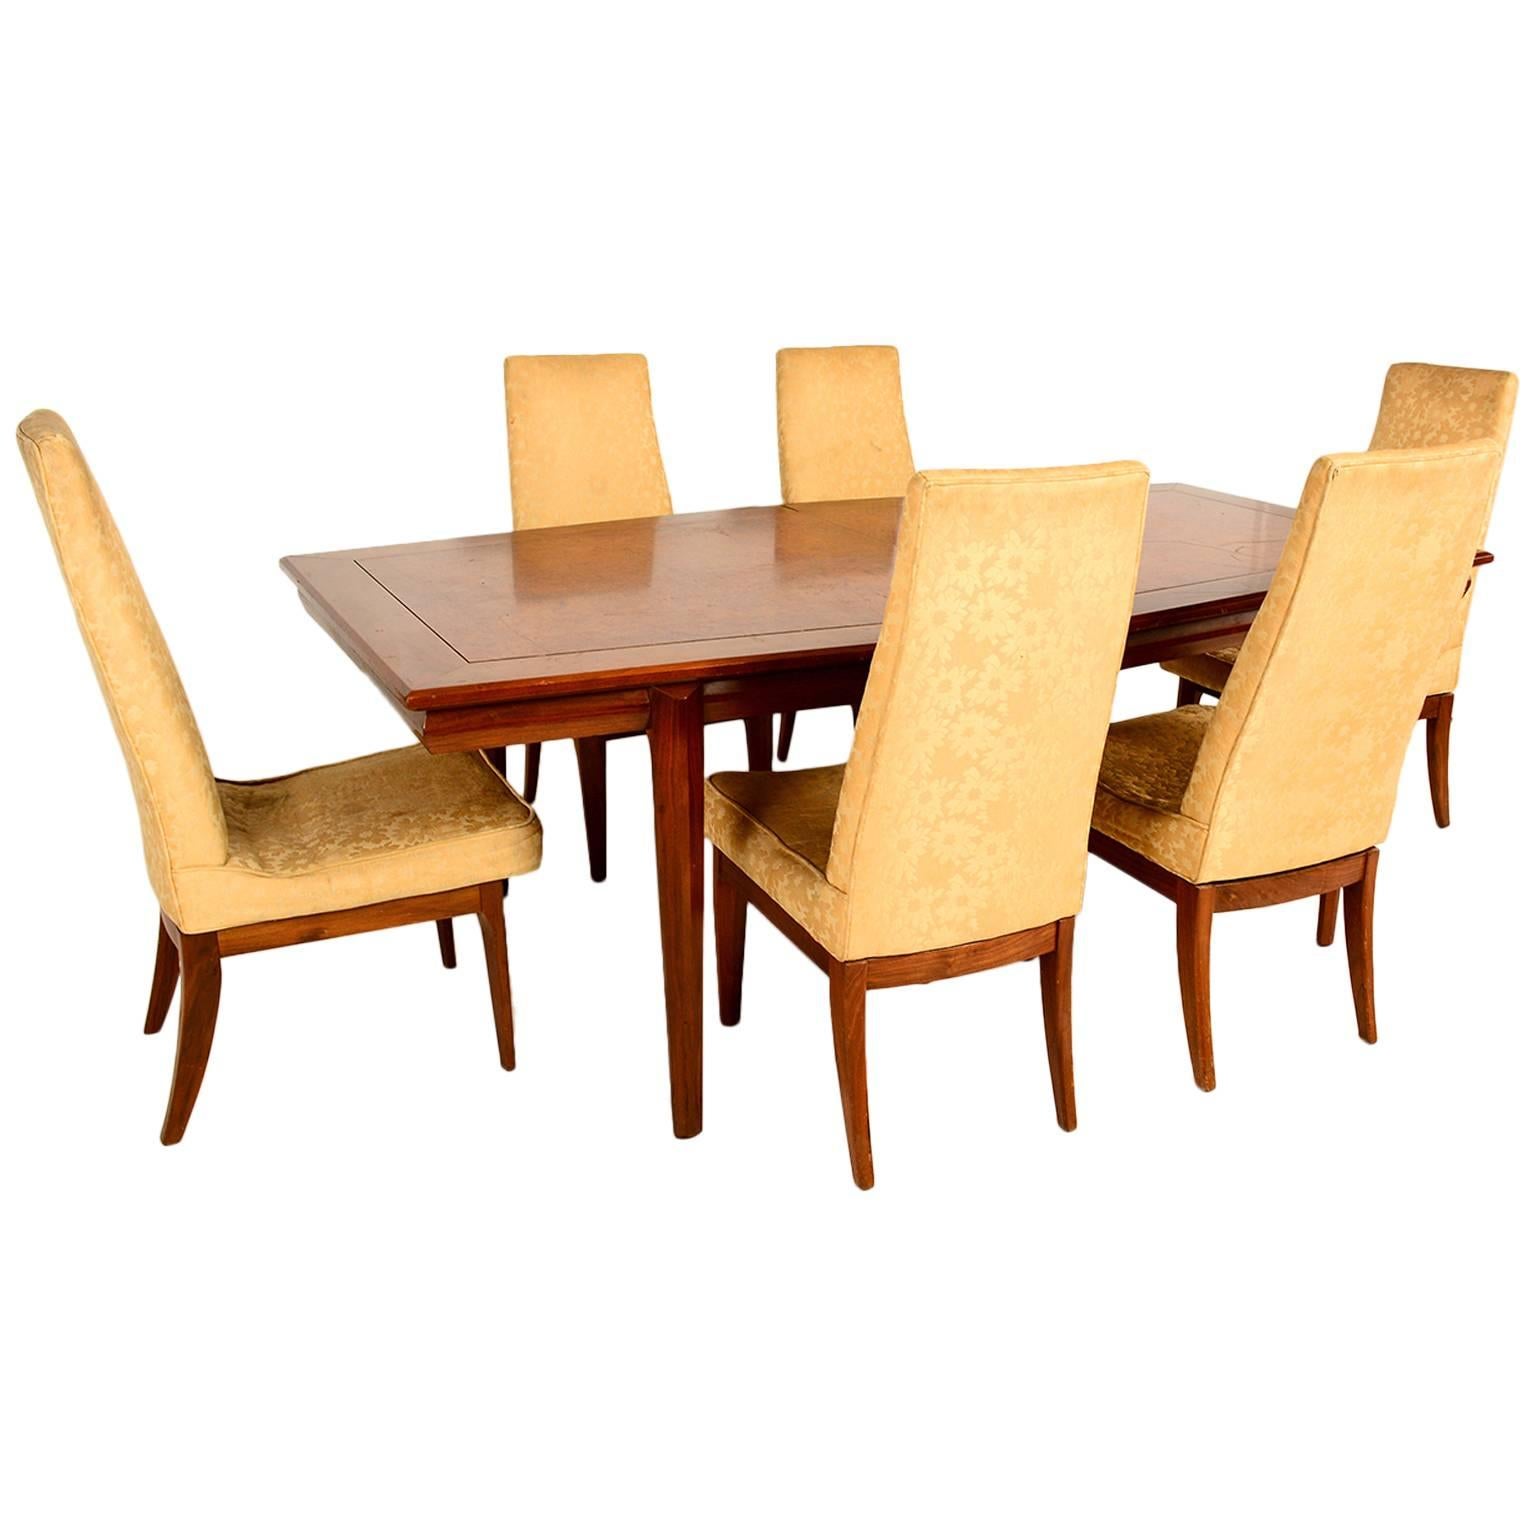 For your consideration a vintage dining table designed by Monteverdi & Young.

Solid walnut wood with burl wood veneer top.

Sculptural diamond shape with amazing quality. 

Chairs listed in another posting. 

Table includes two leaves